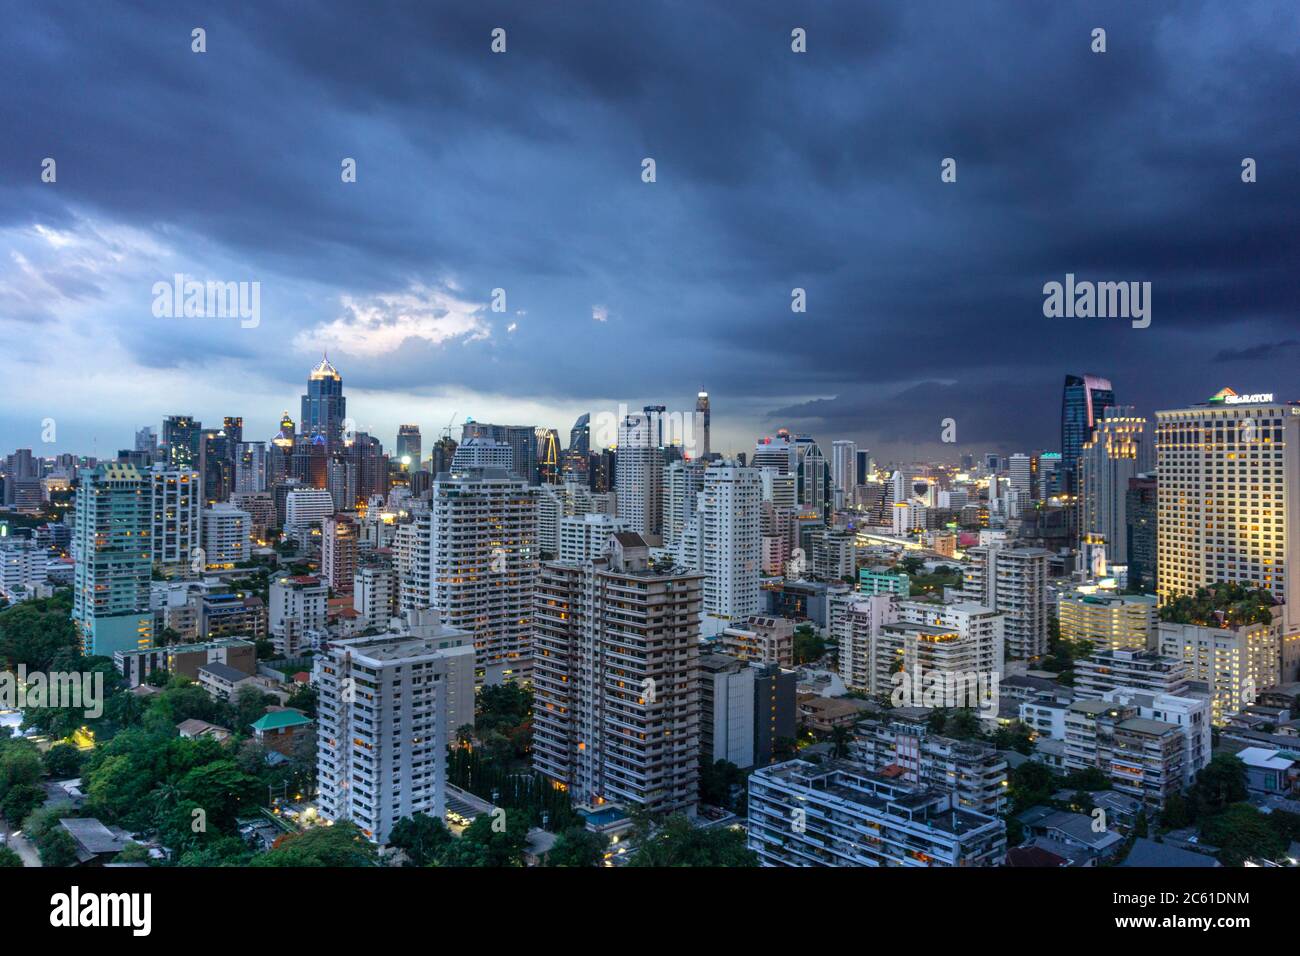 Asia, Thailand, Bankgok. Heavy rain clouds over the central business district around Lumpini / Ratchathewi district during the rainy season monsoon Stock Photo